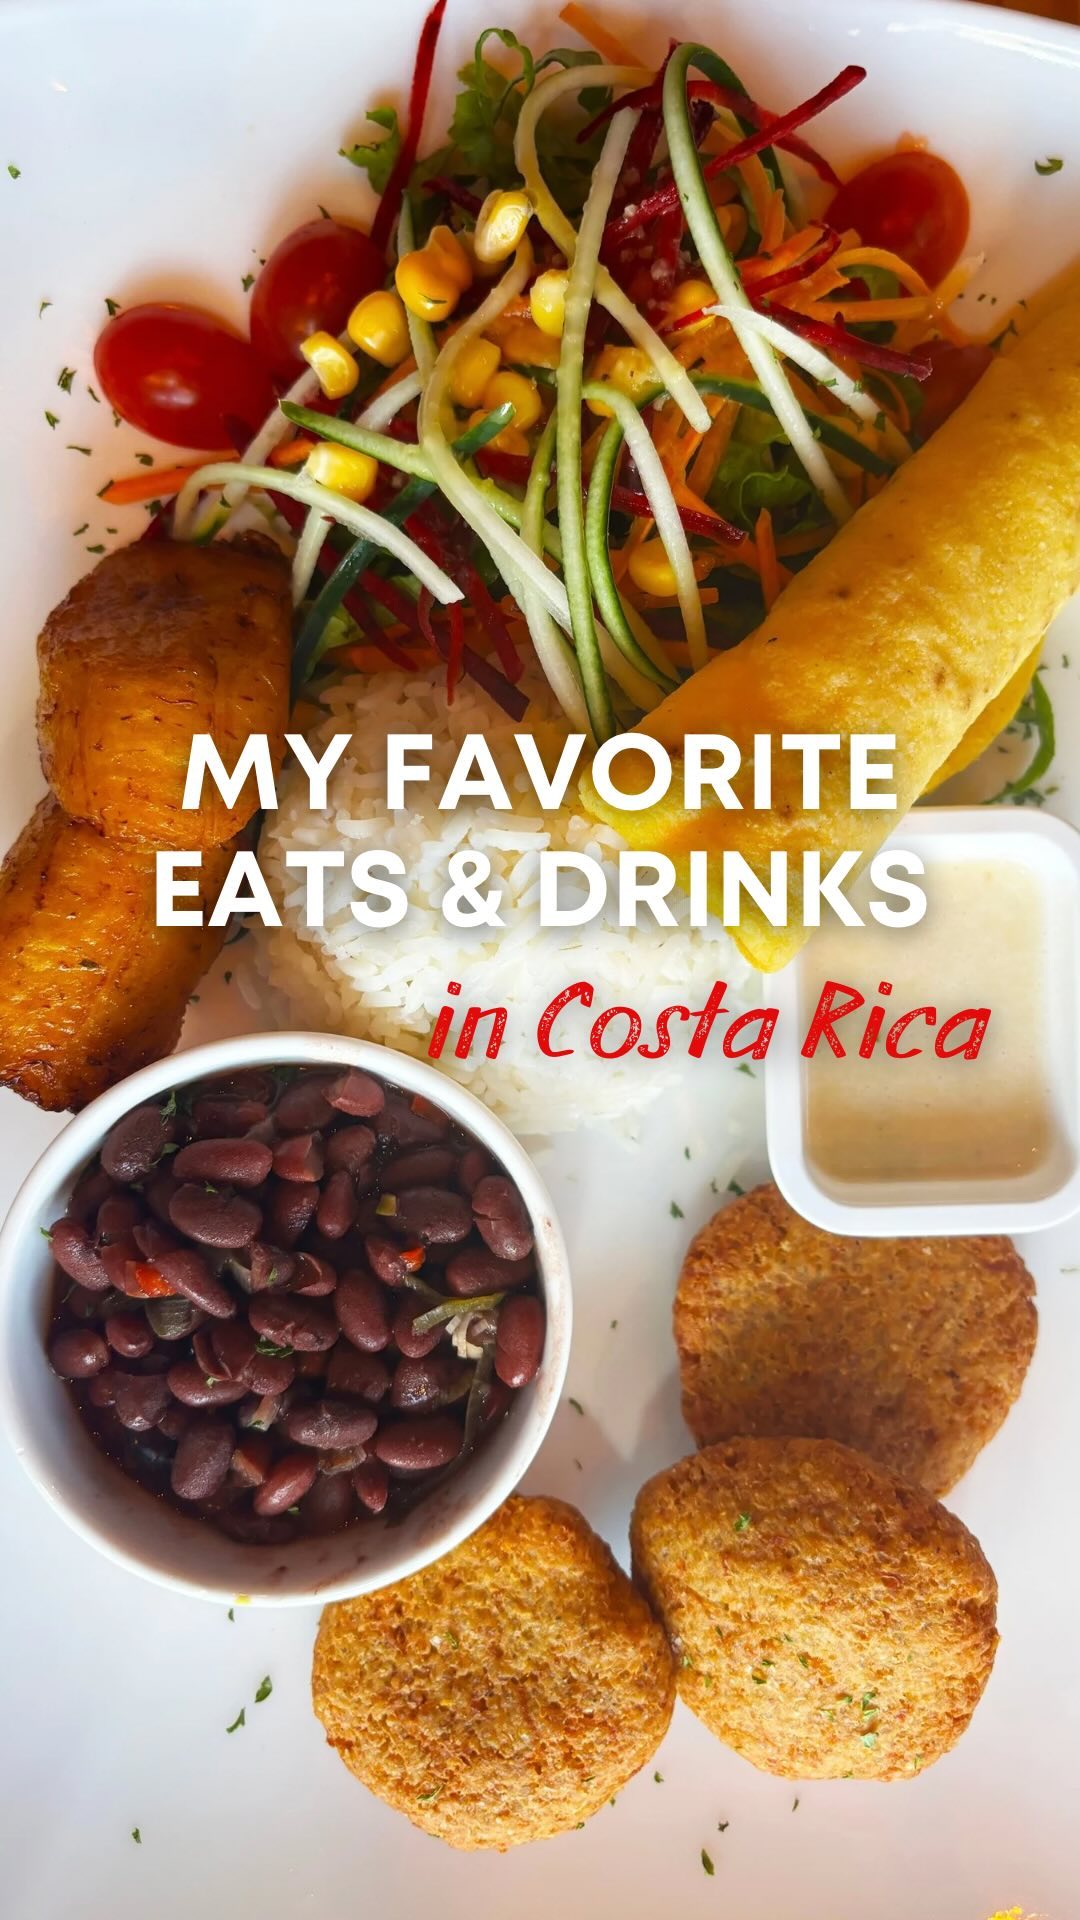 25 Seconds of My Favorite Eats & Drinks in Costa Rica 😋

As usual, I did a good amount of trip research beforehand to scope out eateries with vegan & vegetarian options, & we enjoyed a lot of great food throughout our trip! Here were my favorites:

✨A typical Costa Rican dish called casado, made of rice, beans, salad, plantains & often something additional like falafel bites
✨Tons of fresh local fruit 
✨Yuca Empanadas
✨Strawberry daquiri in a pineapple with watermelon slices… so refreshing to enjoy on the beach in the 95 degree heat! 🍍🍓🍉
✨Veggie chickpea omelet

Top 5 Eateries: 
-@potsandbowls 📍Playa Grande 
-@surfboxcr 📍Playa Flamingo
-@meveganhotel 📍Tamarindo
-@thegreenspoon_cr 📍La Fortuna 
-@findyouronda 📍Playa Grande 

#travelgram #plantbasedfood #costarica #vacationvibes #vegetarian #veganfood #travelblogger #healthyfoodie #fruit #locavore #mytinyatlas #goodeats